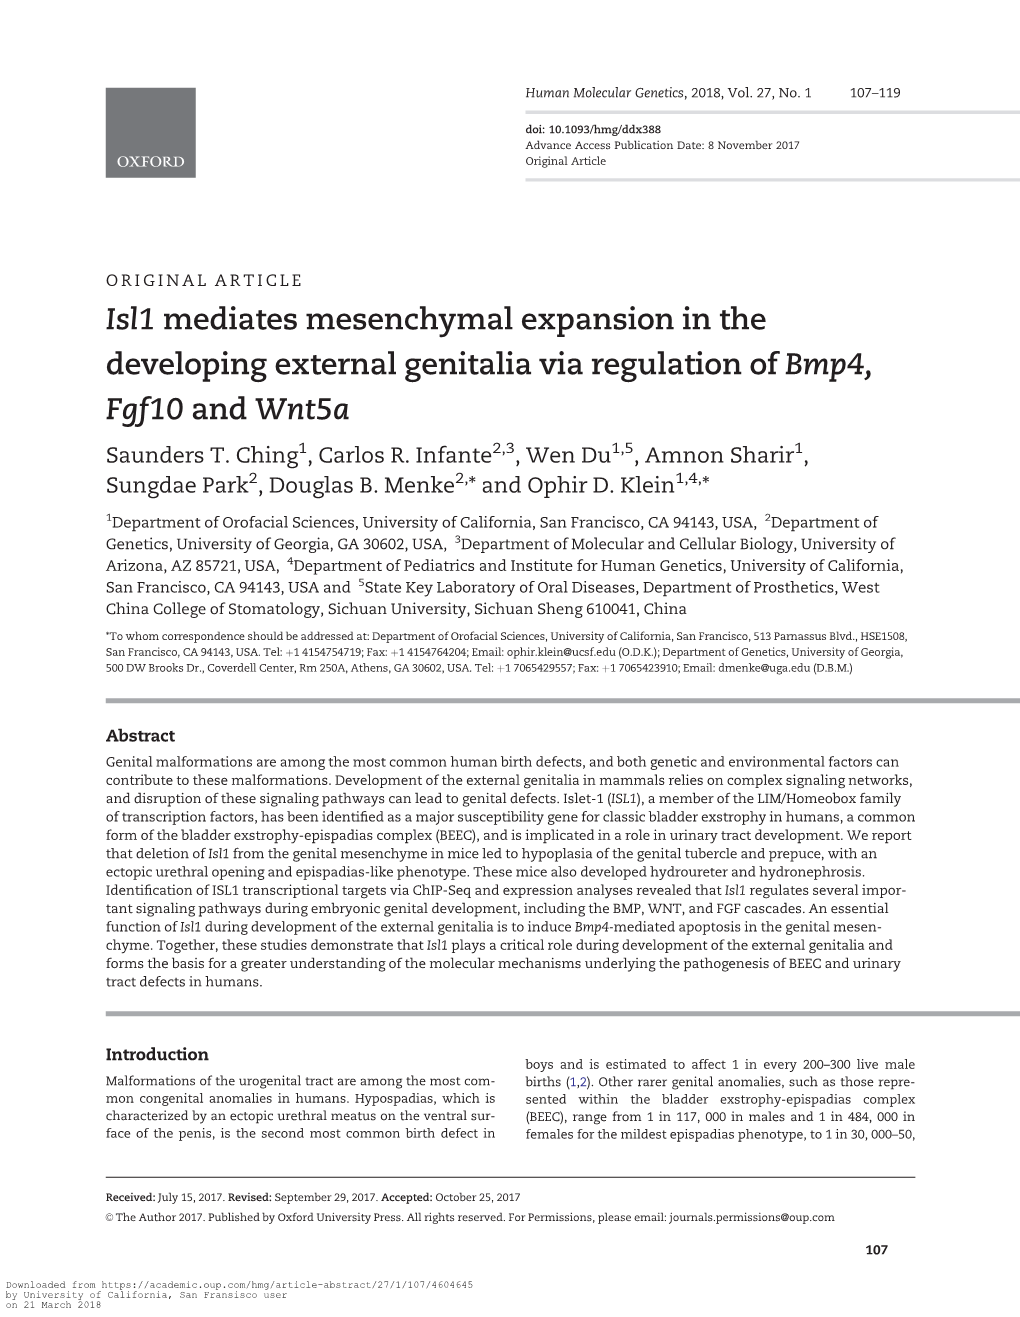 Isl1 Mediates Mesenchymal Expansion in the Developing External Genitalia Via Regulation of Bmp4, Fgf10 and Wnt5a Saunders T